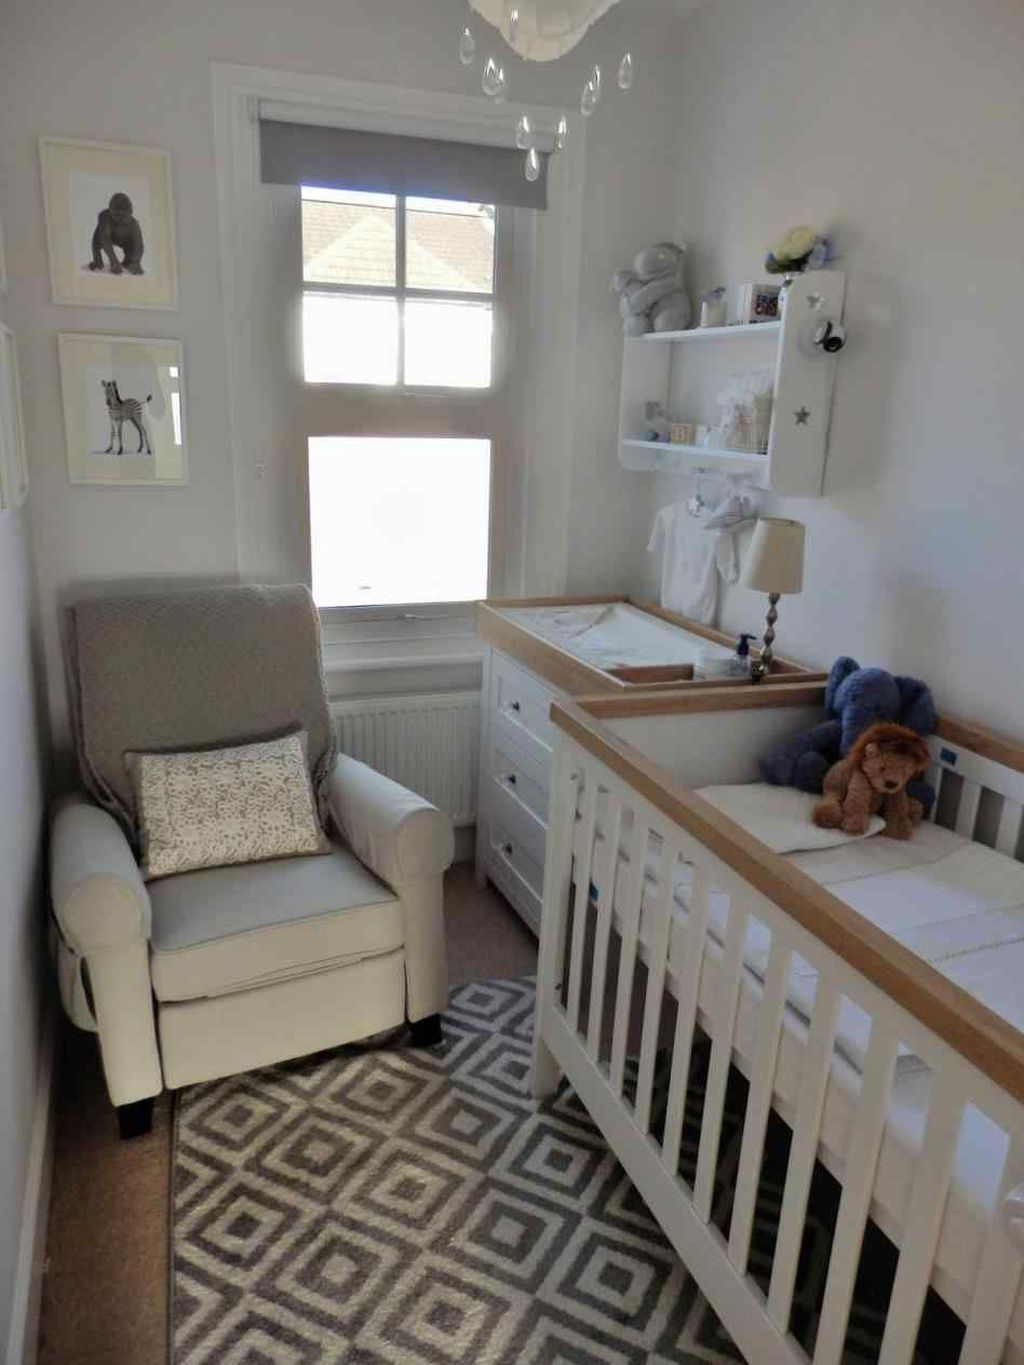 48 Elegant Small Nursery Design Ideas You Must Have Ba within sizing 1024 X 1365